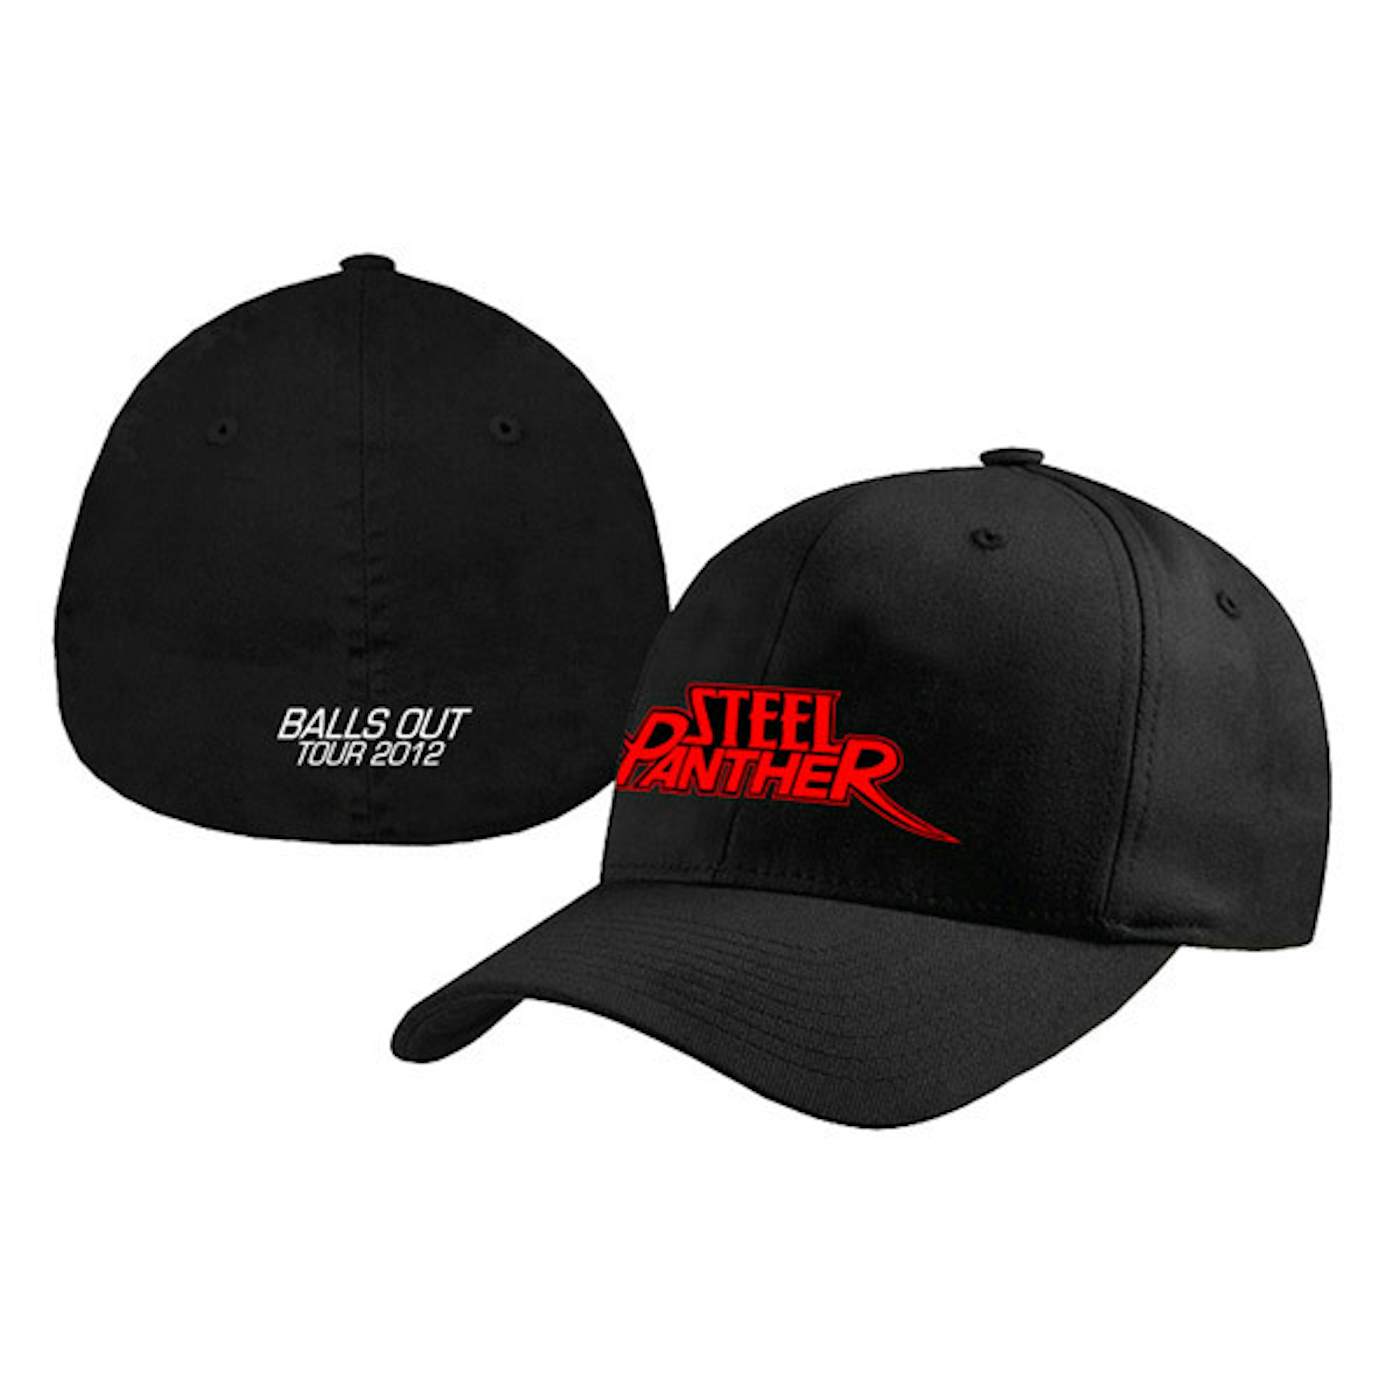 Steel Panther Balls Out Fitted Hat